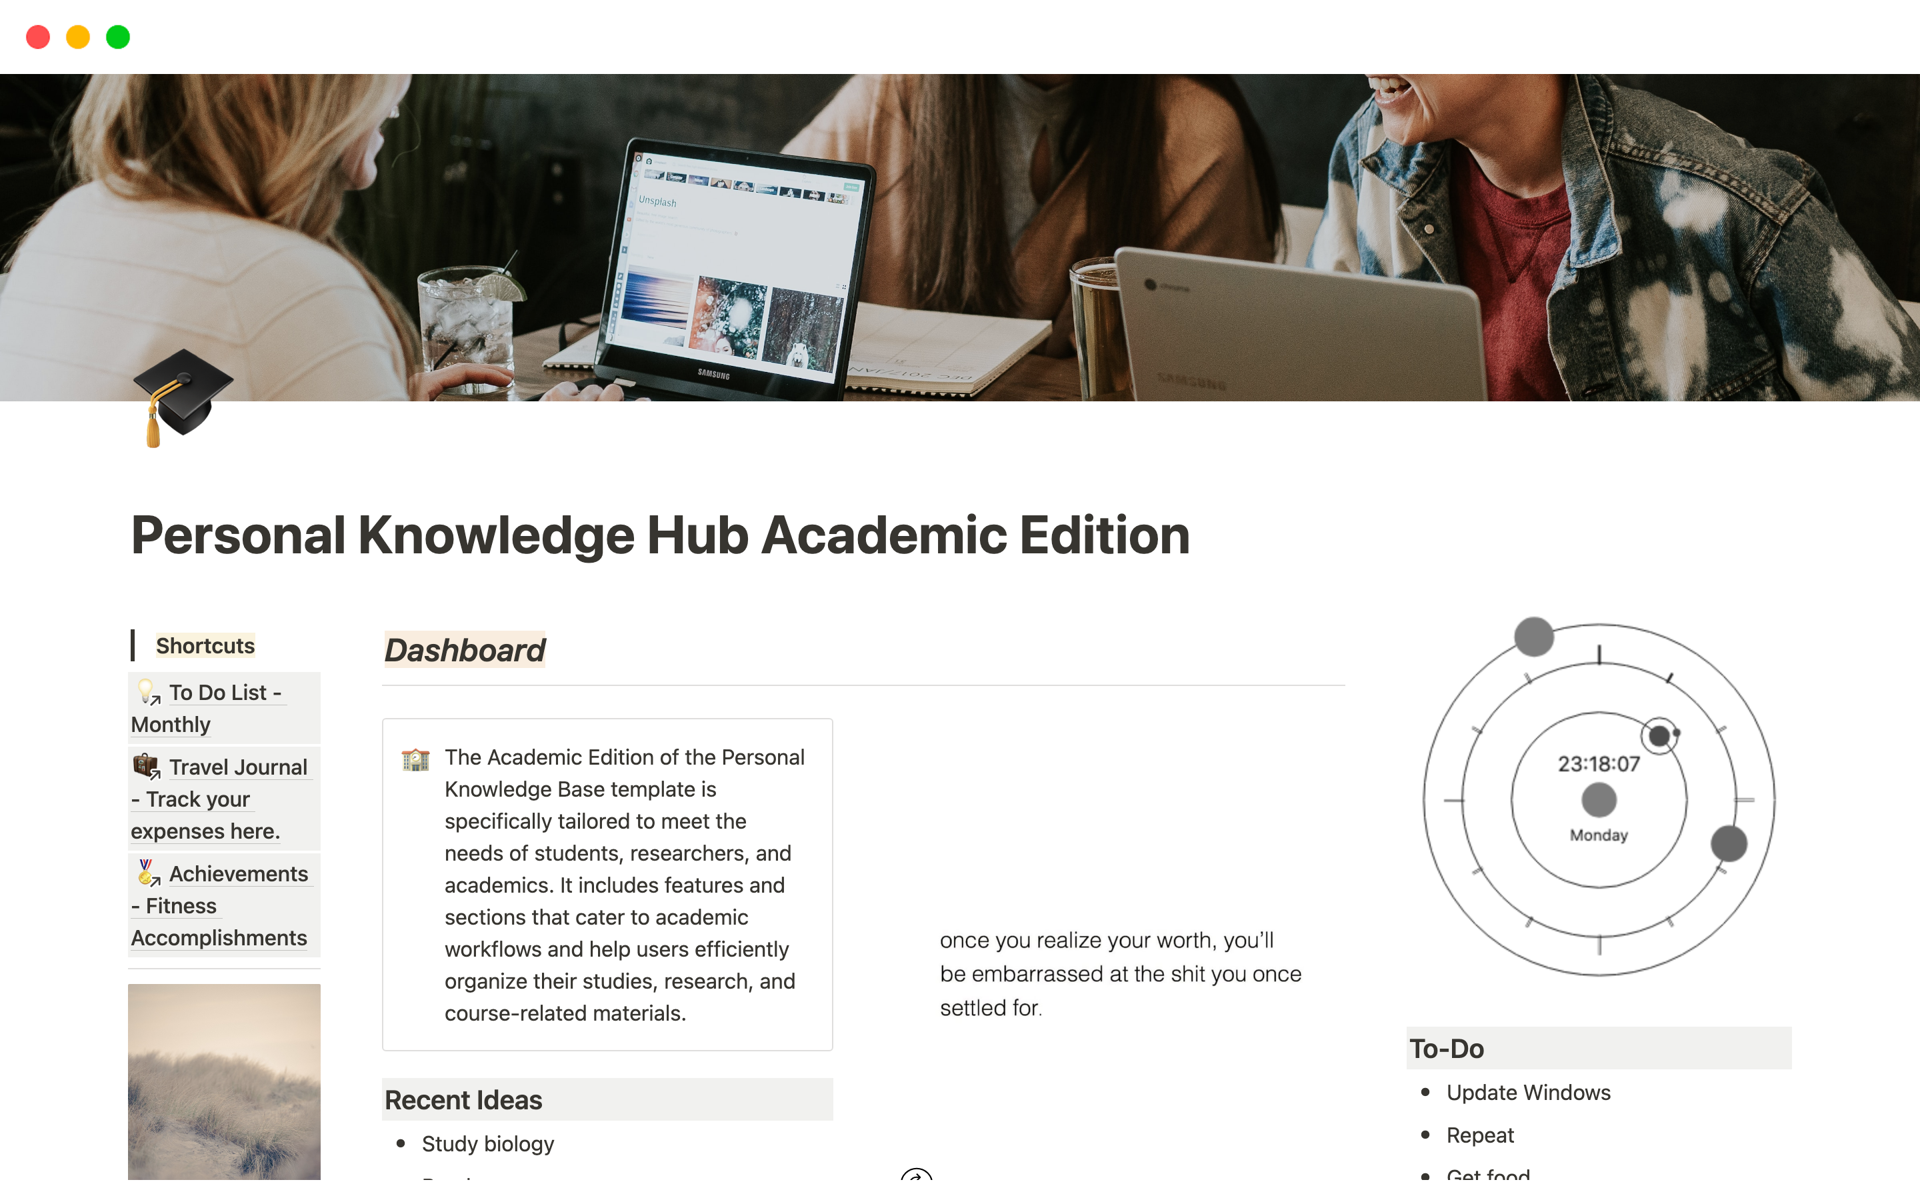 The Academic Edition of the Personal Knowledge Base template is specifically tailored to meet the needs of students, researchers, and academics.